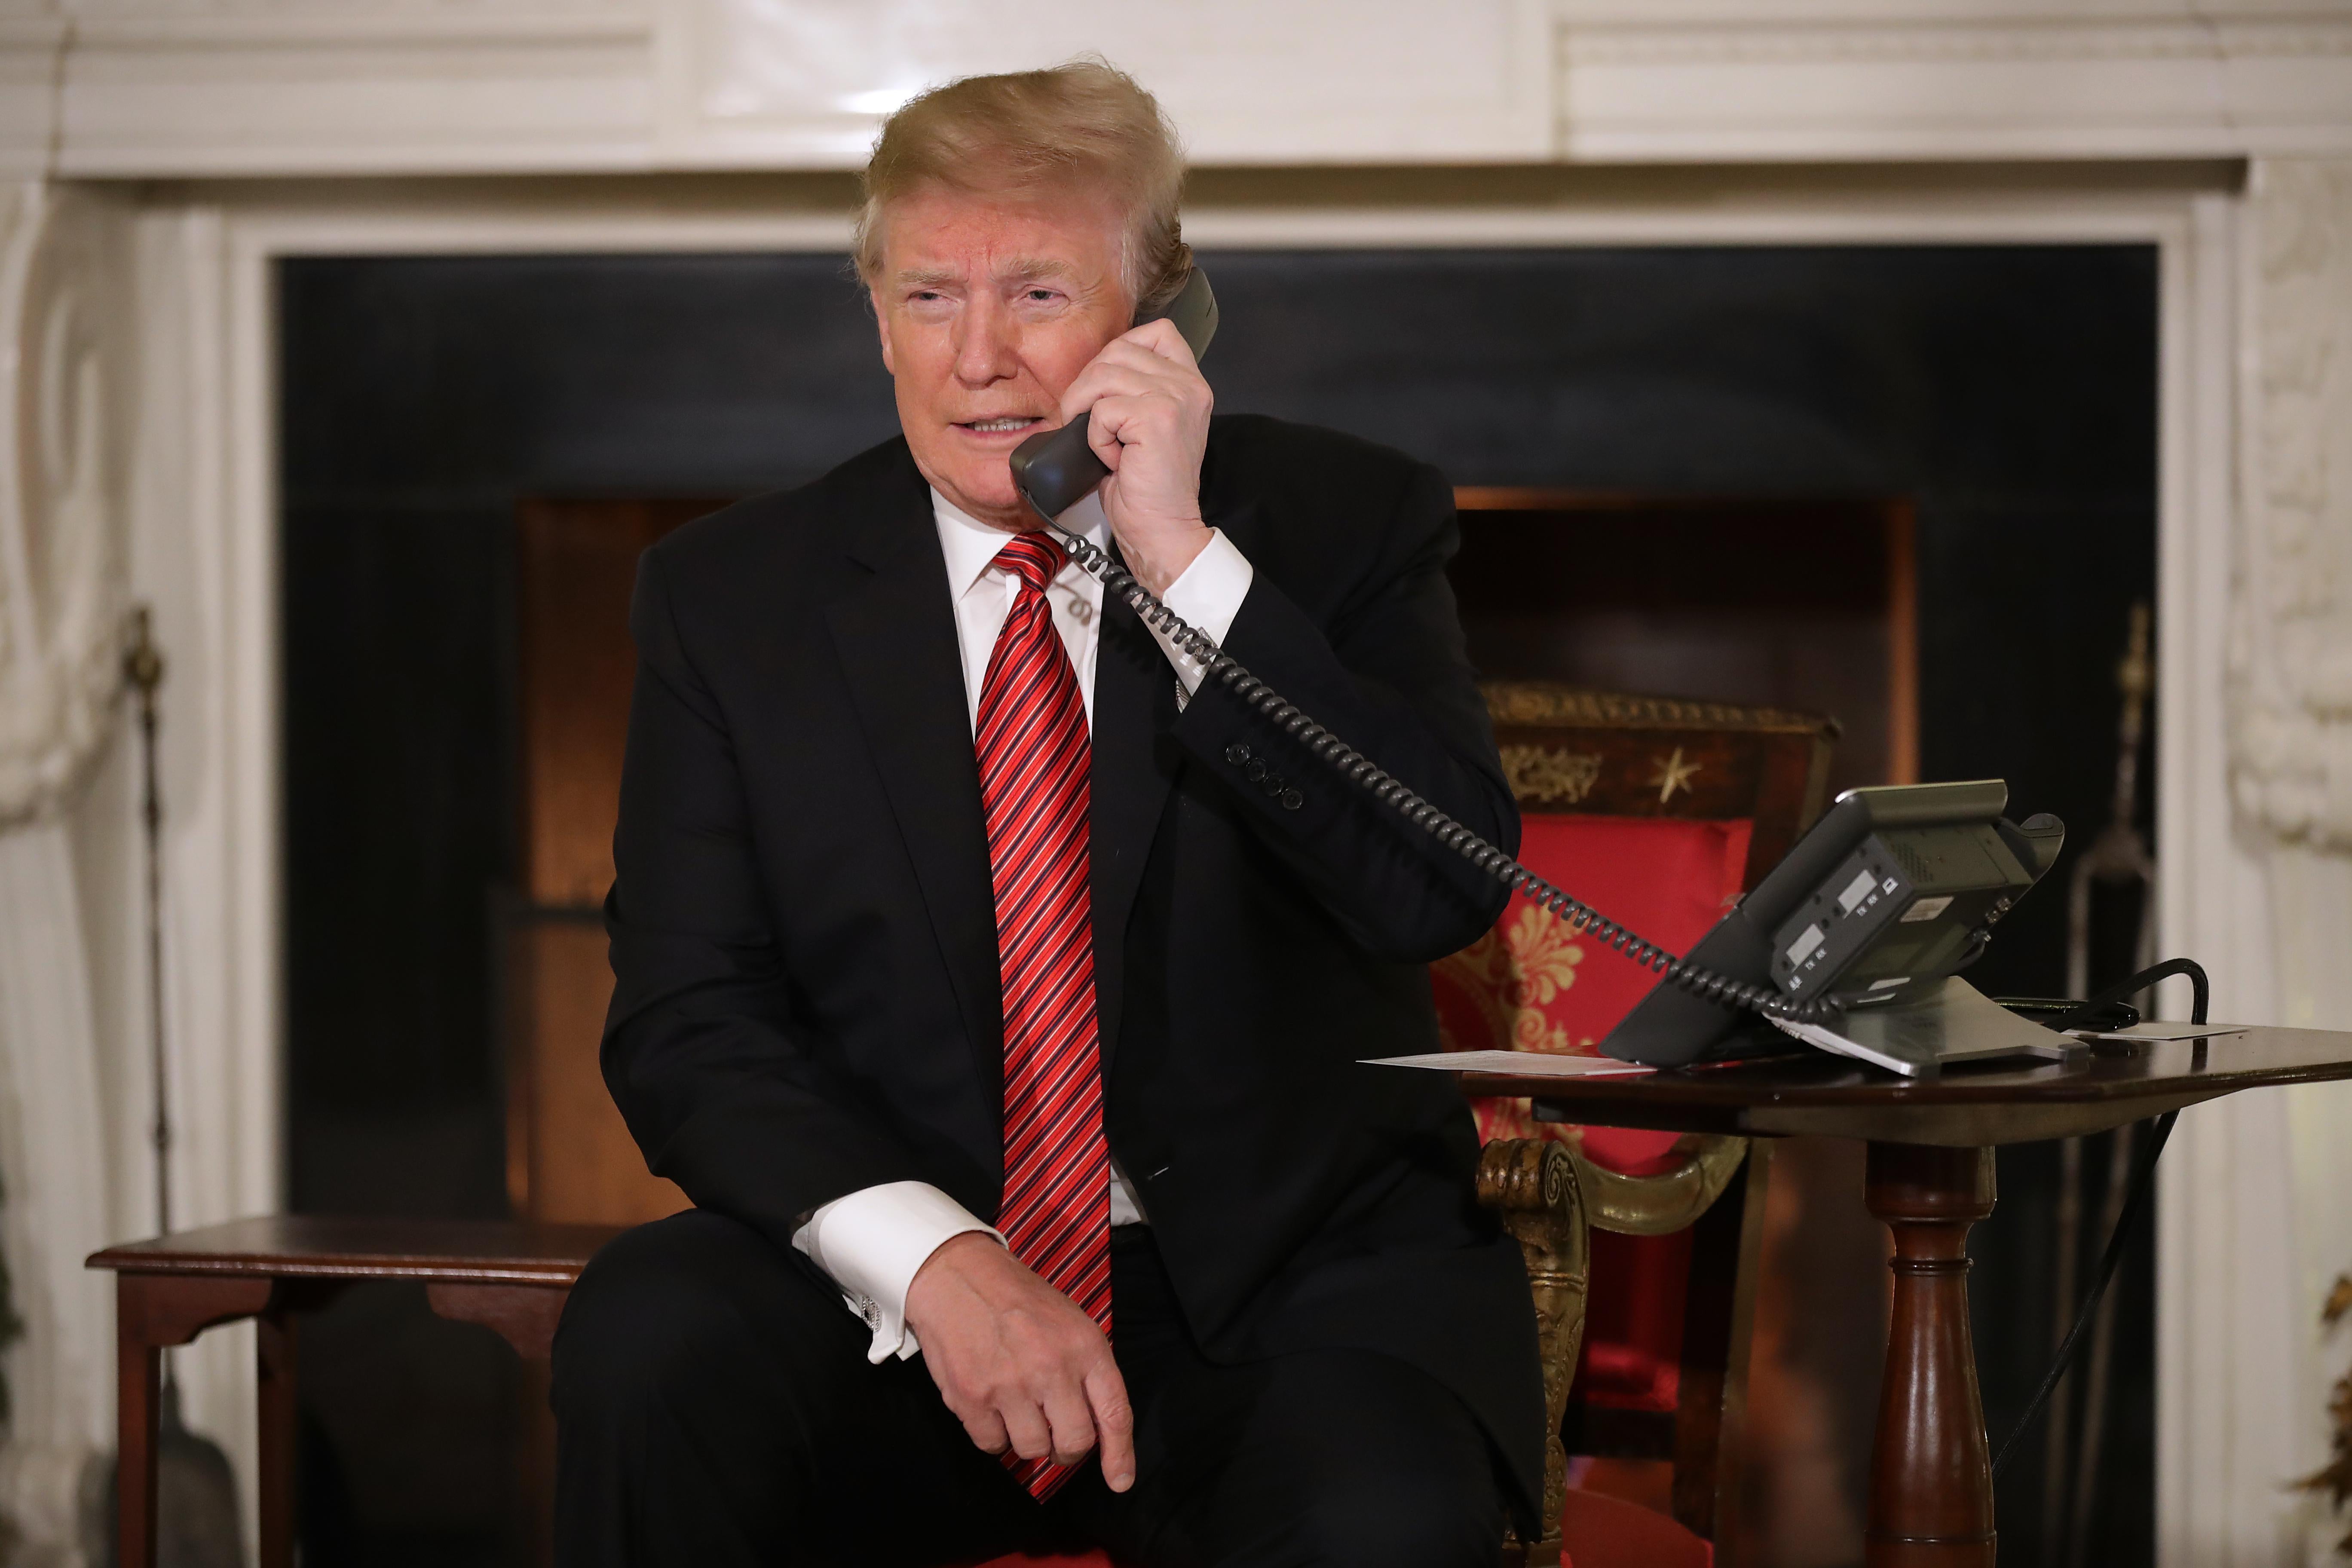 Trump holding a phone to his ear as he takes calls from children in the East Room of the White House for a Santa Claus event on Dec. 24, 2018.